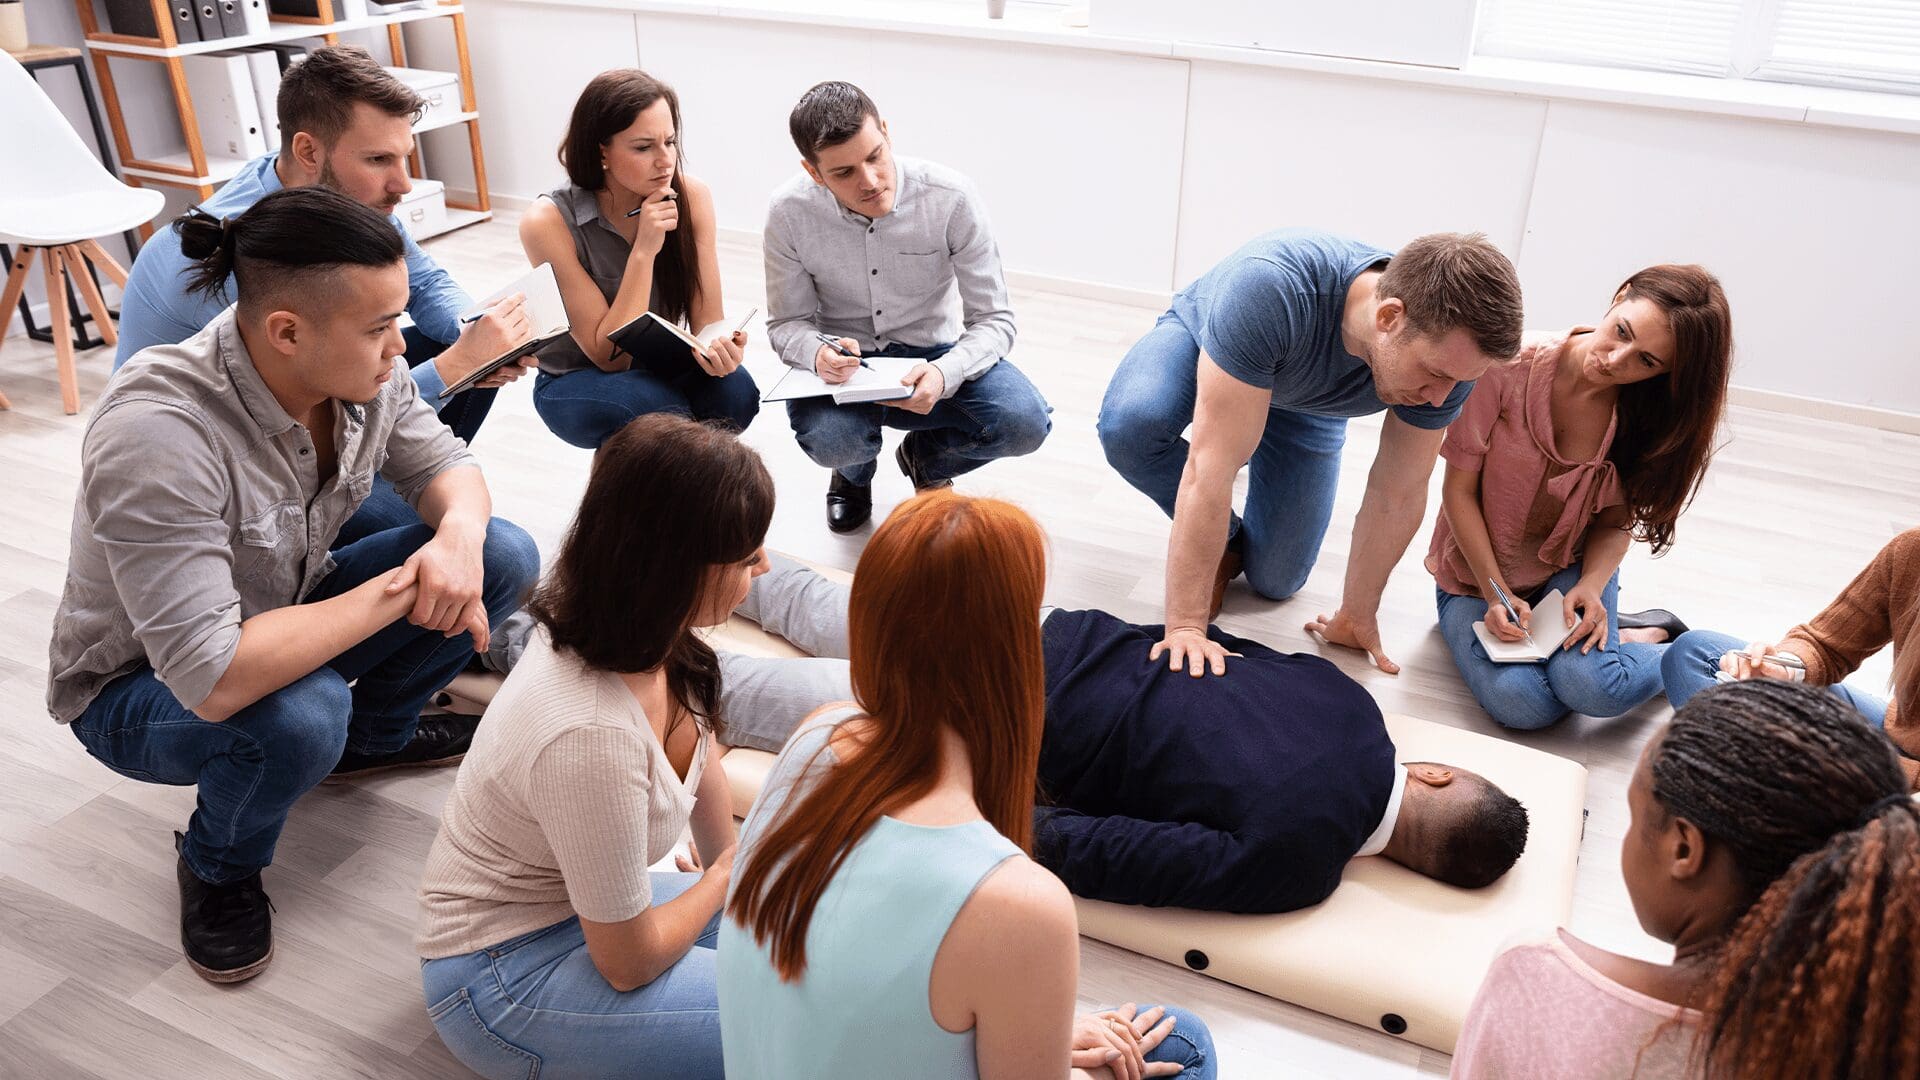 National First Aid Training Institute now offers training across Launceston, Toowoomba and the Sunshine Coast.